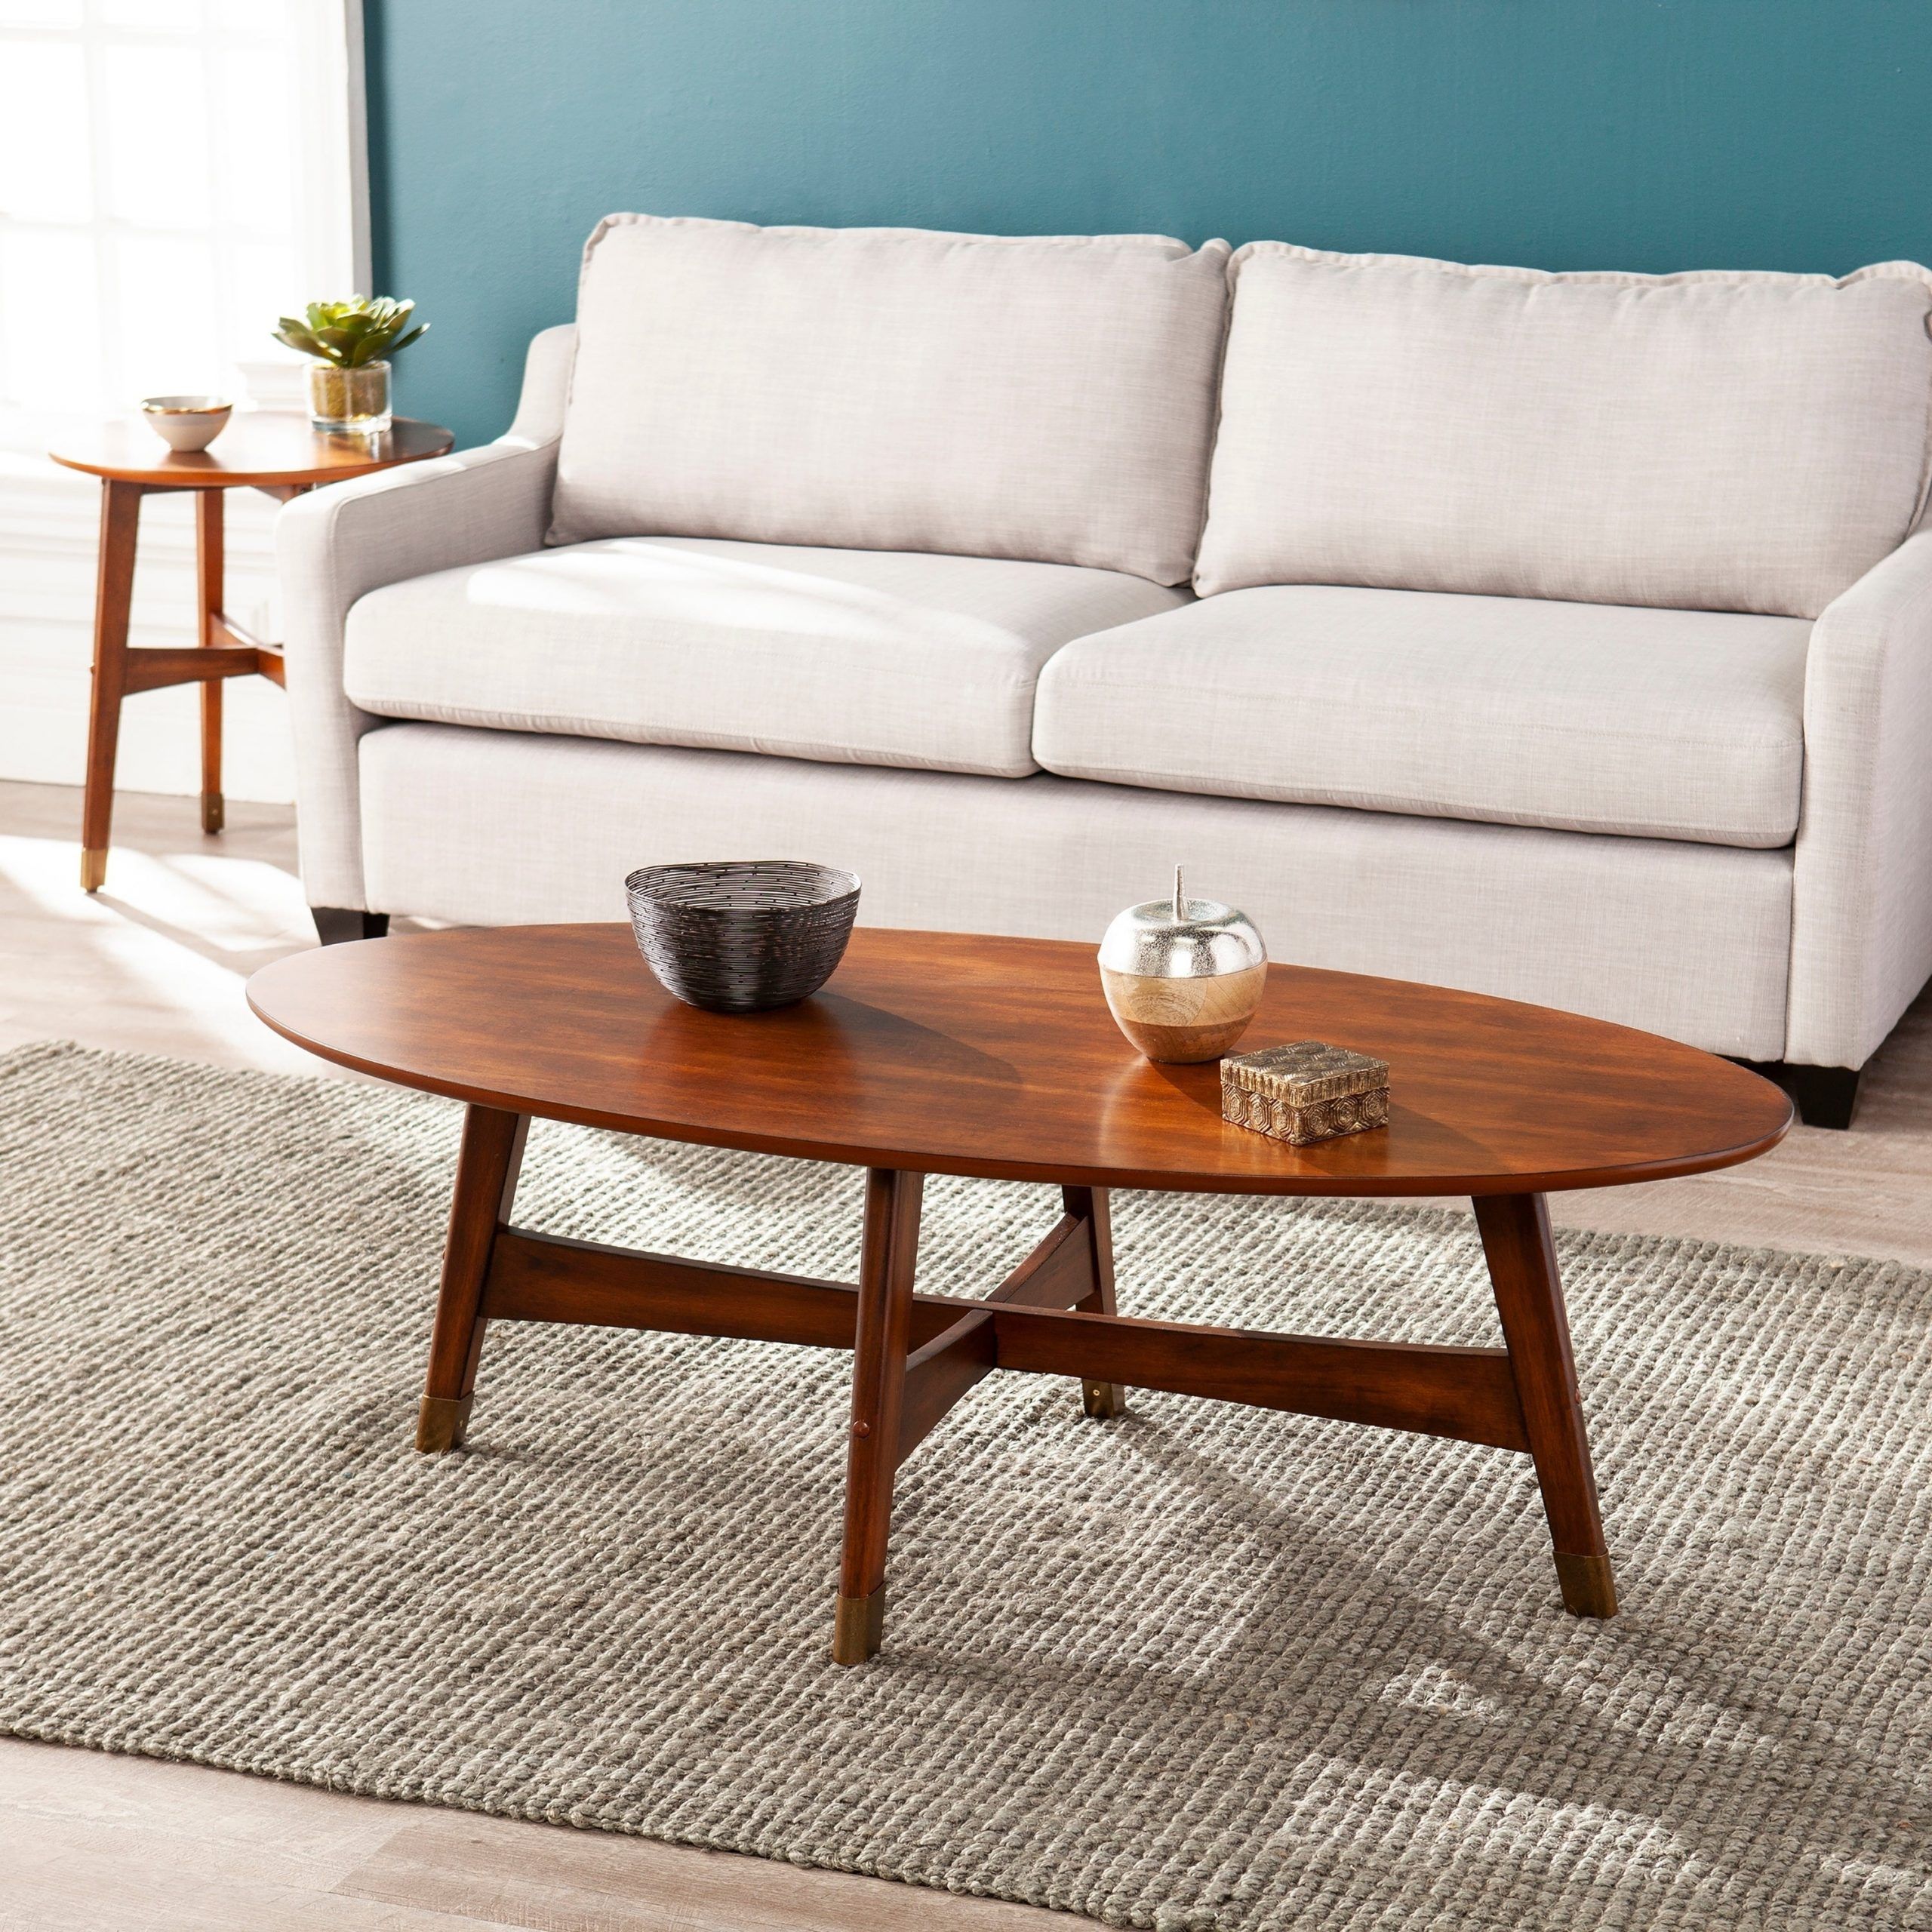 Sei Furniture Ale Oval Mid Century Modern Coffee Table – Overstock –  22700516 Pertaining To Mid Century Coffee Tables (View 11 of 15)